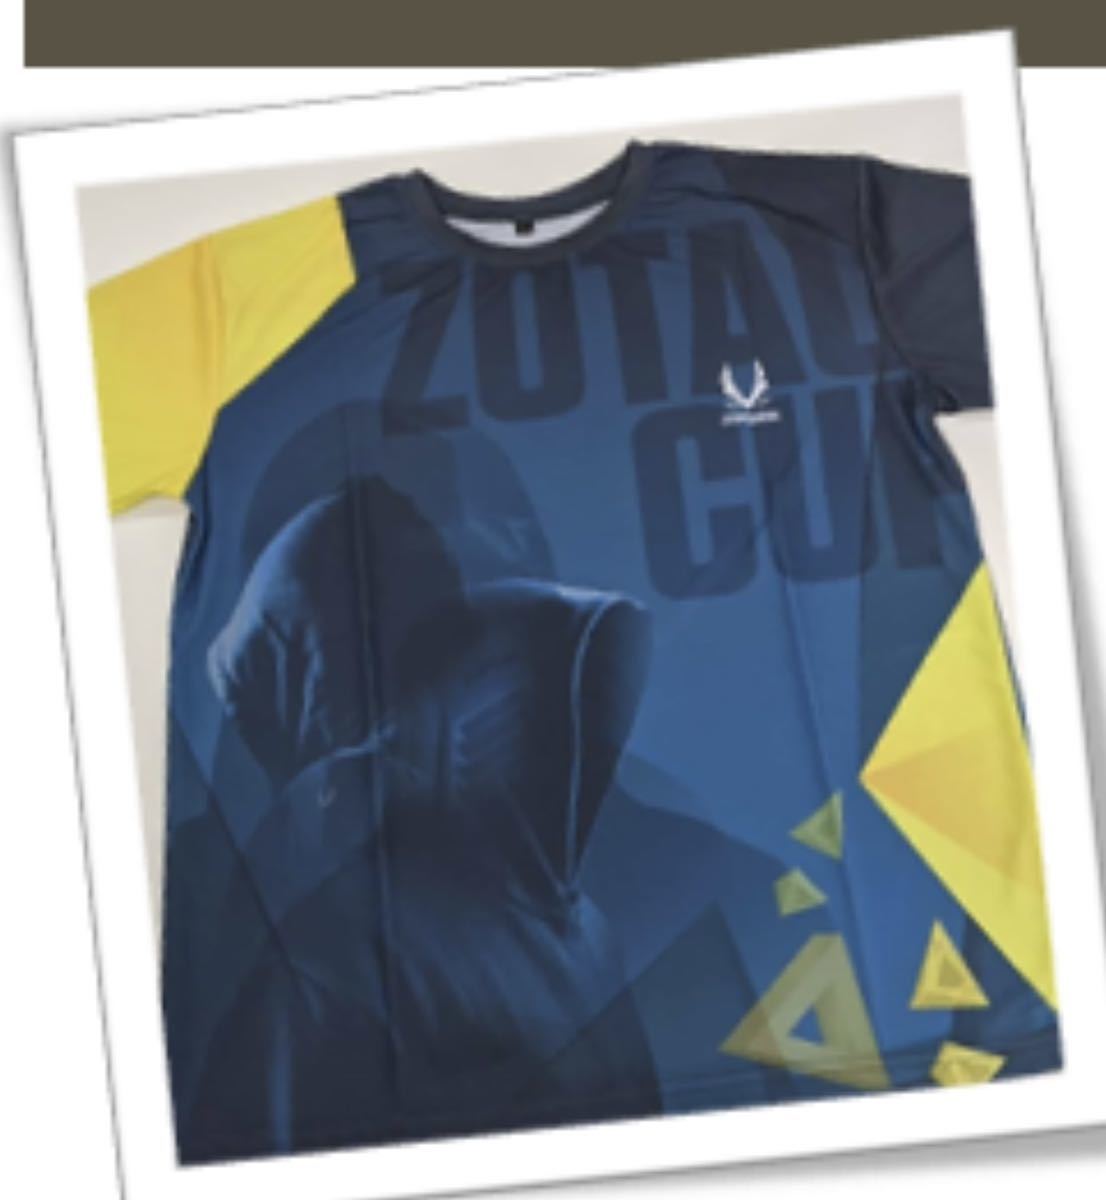 *ZOTAC CUP T-shirt PC parts Manufacturers novelty goods not for sale *